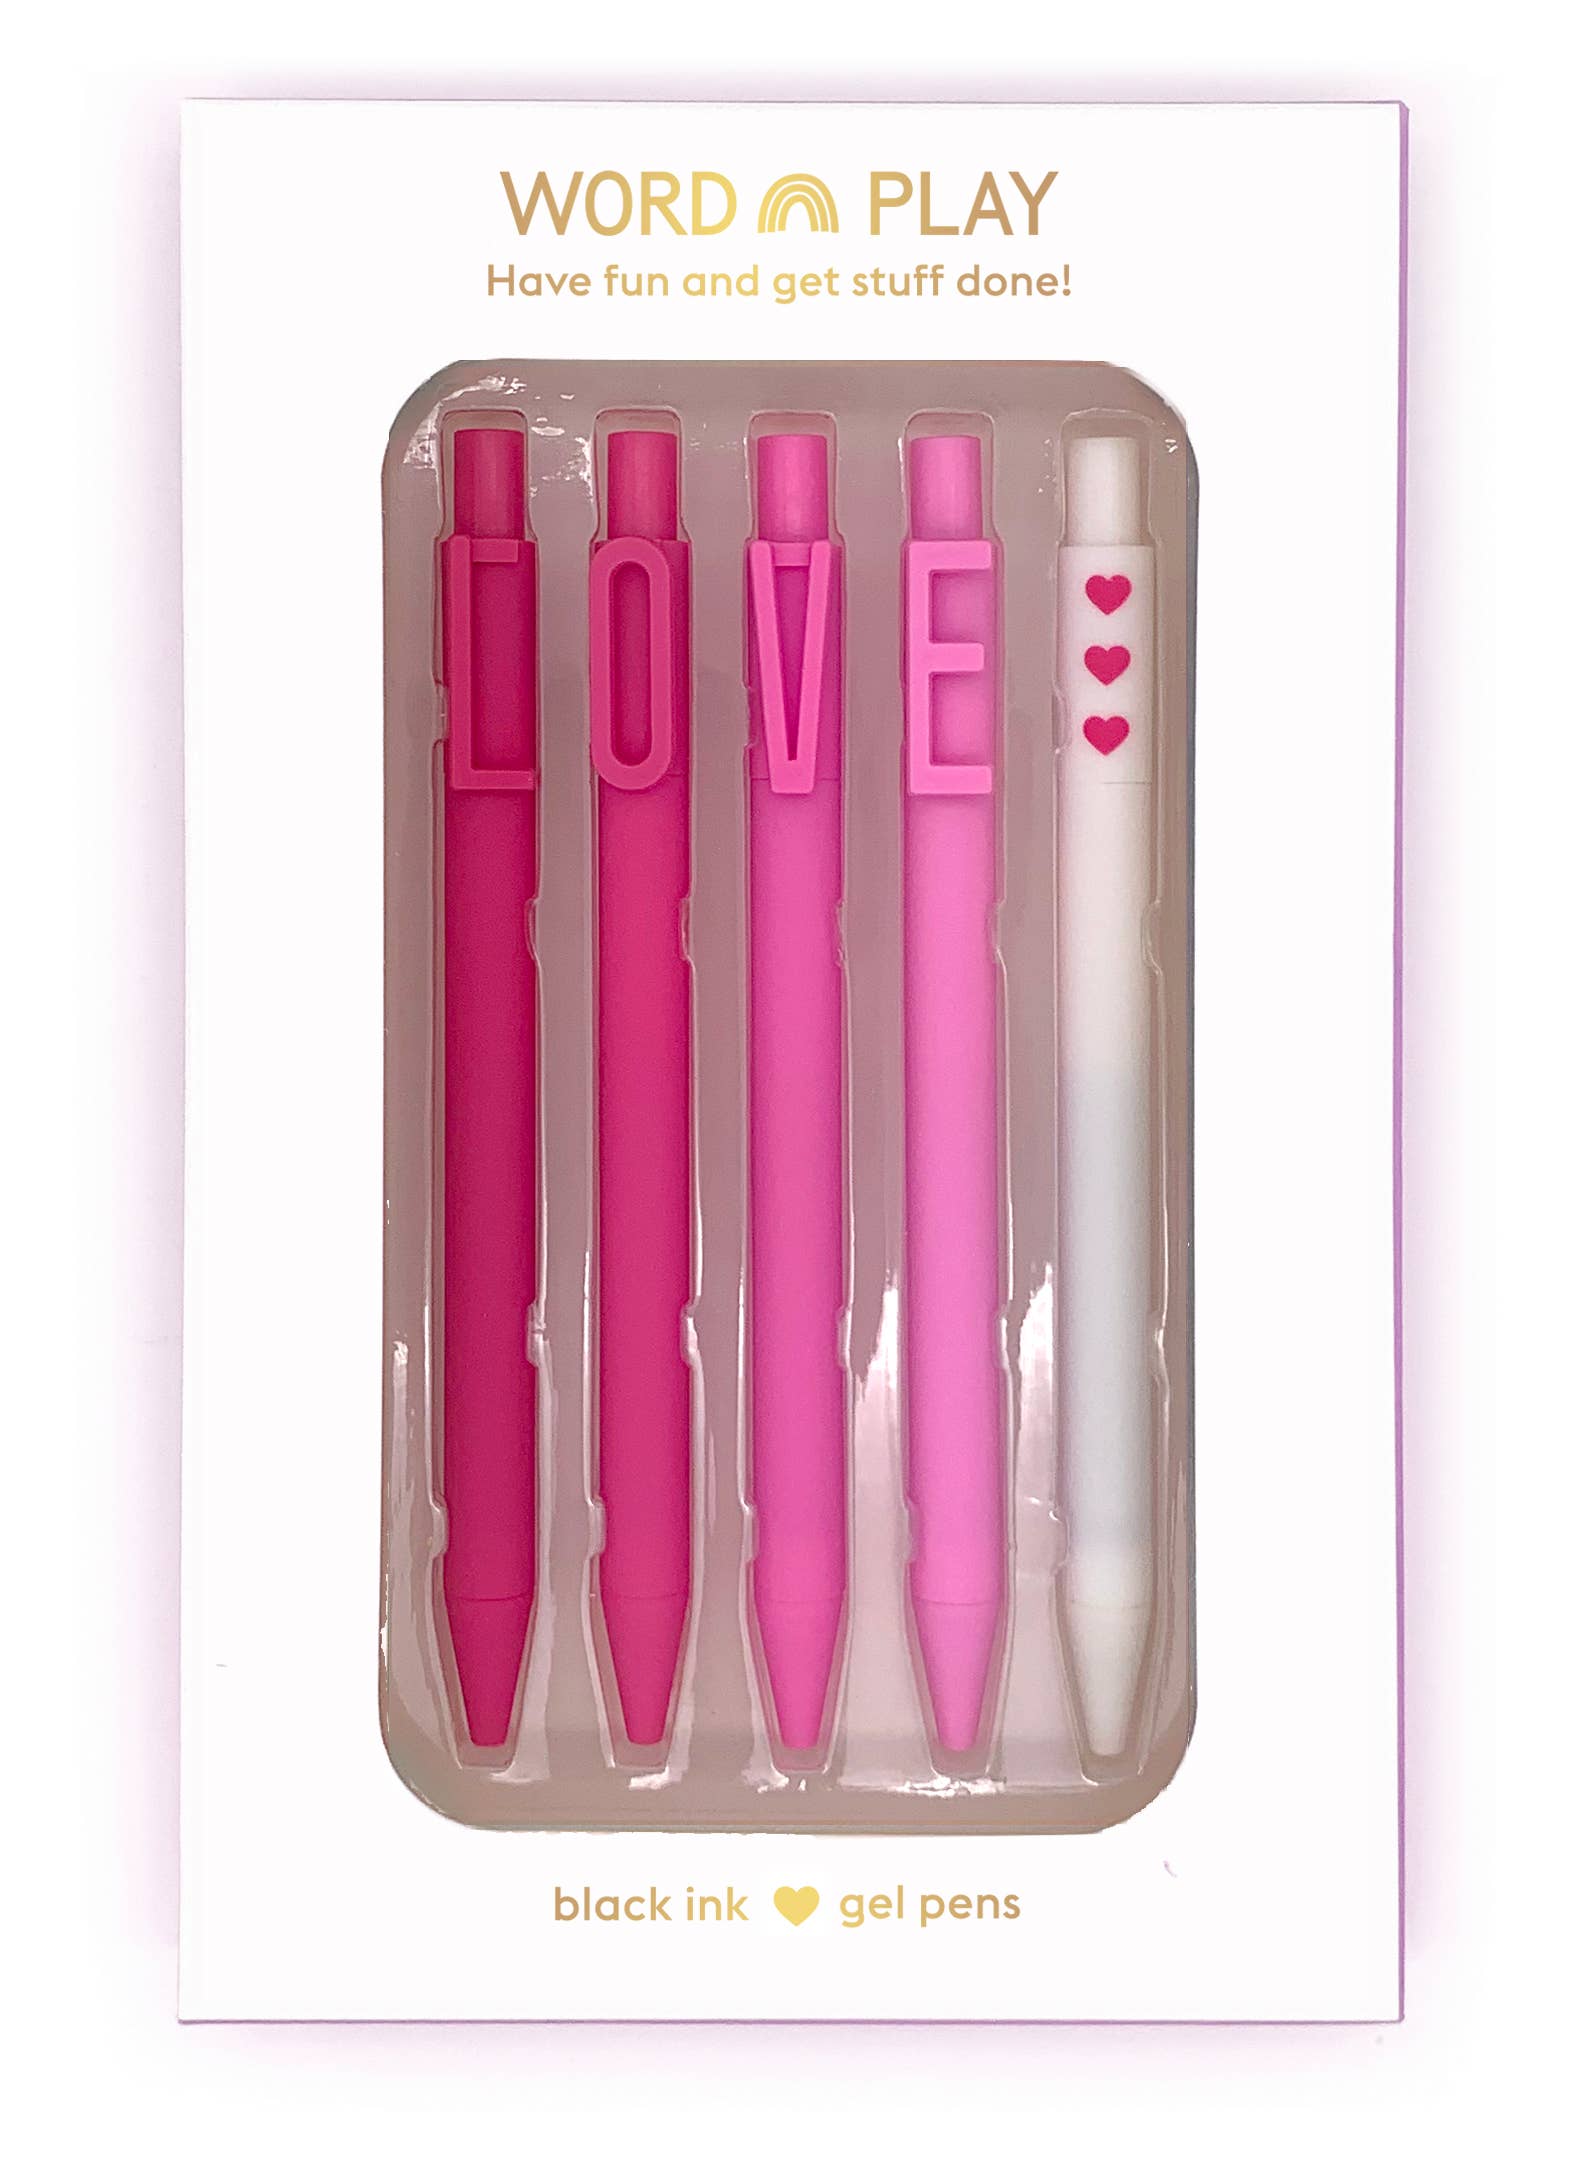 Snifty Word Play Pen Set Love